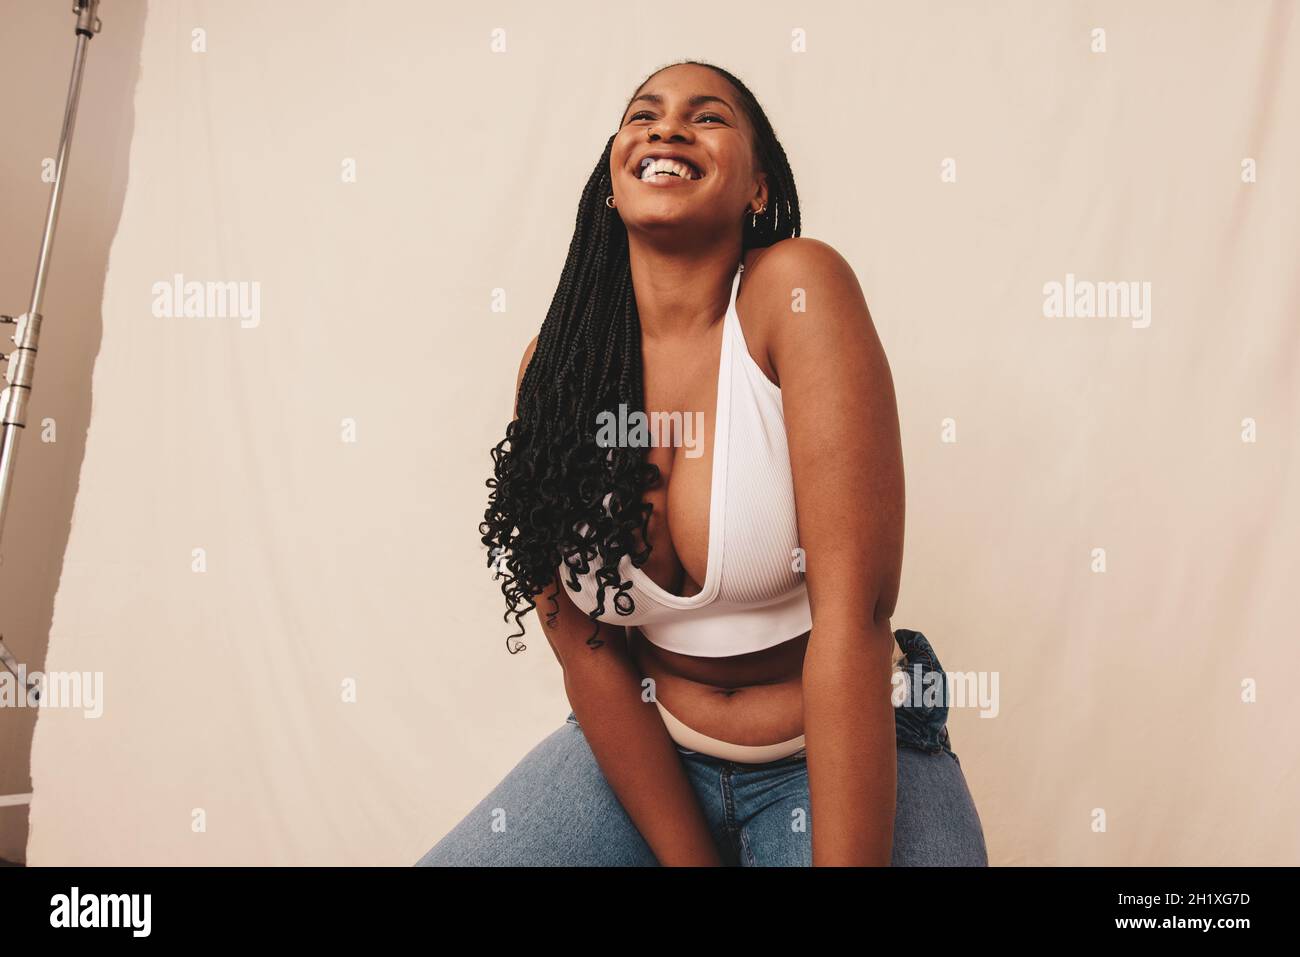 Carefree young woman smiling while sitting on a chair in a studio. Happy young woman feeling comfortable in denim jeans and a bra. Body positive young Stock Photo